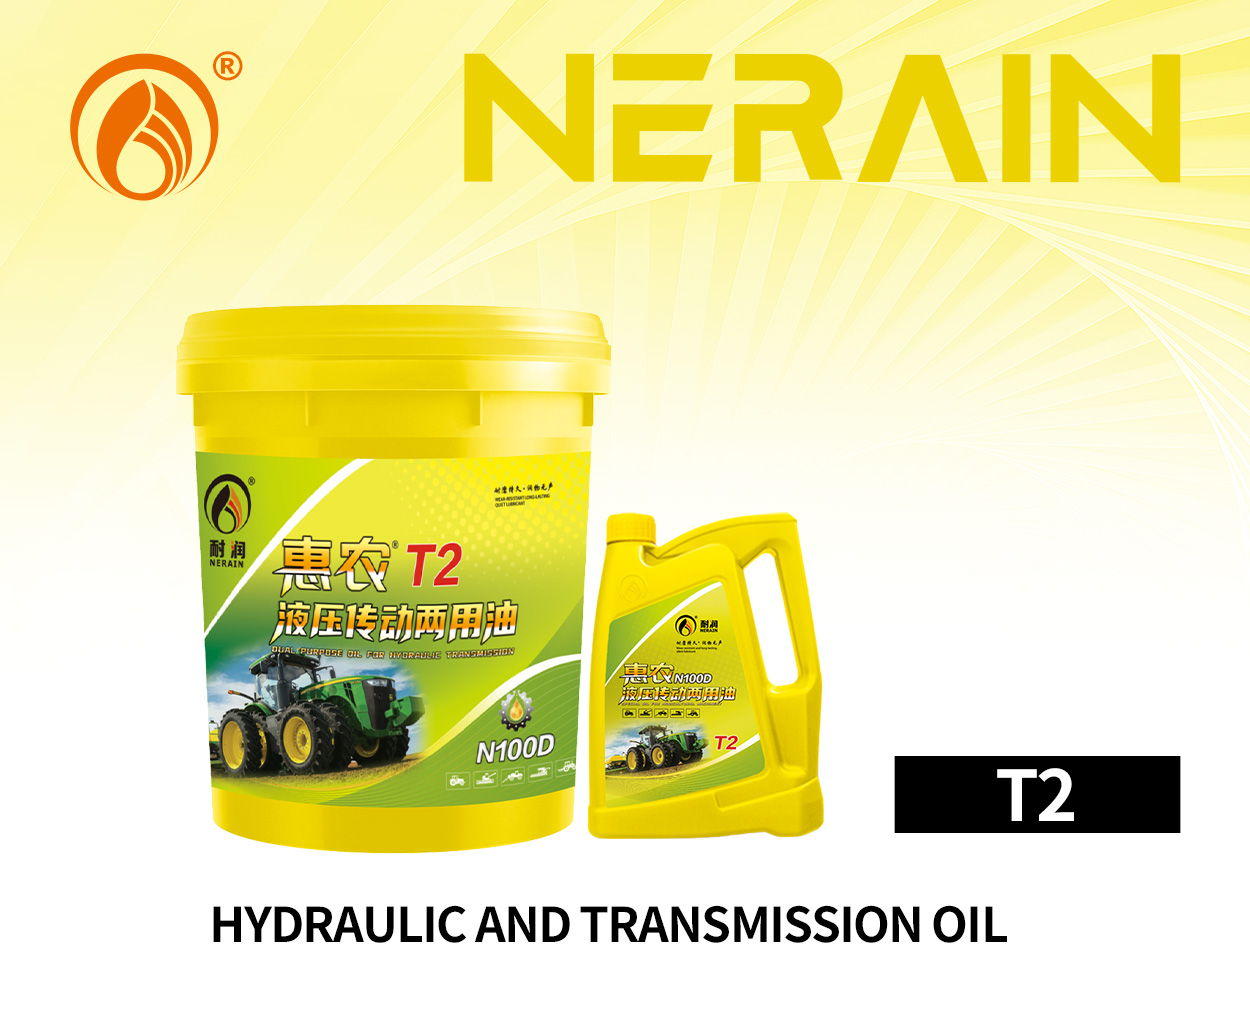 T2 Hydraulic and Transmission oil